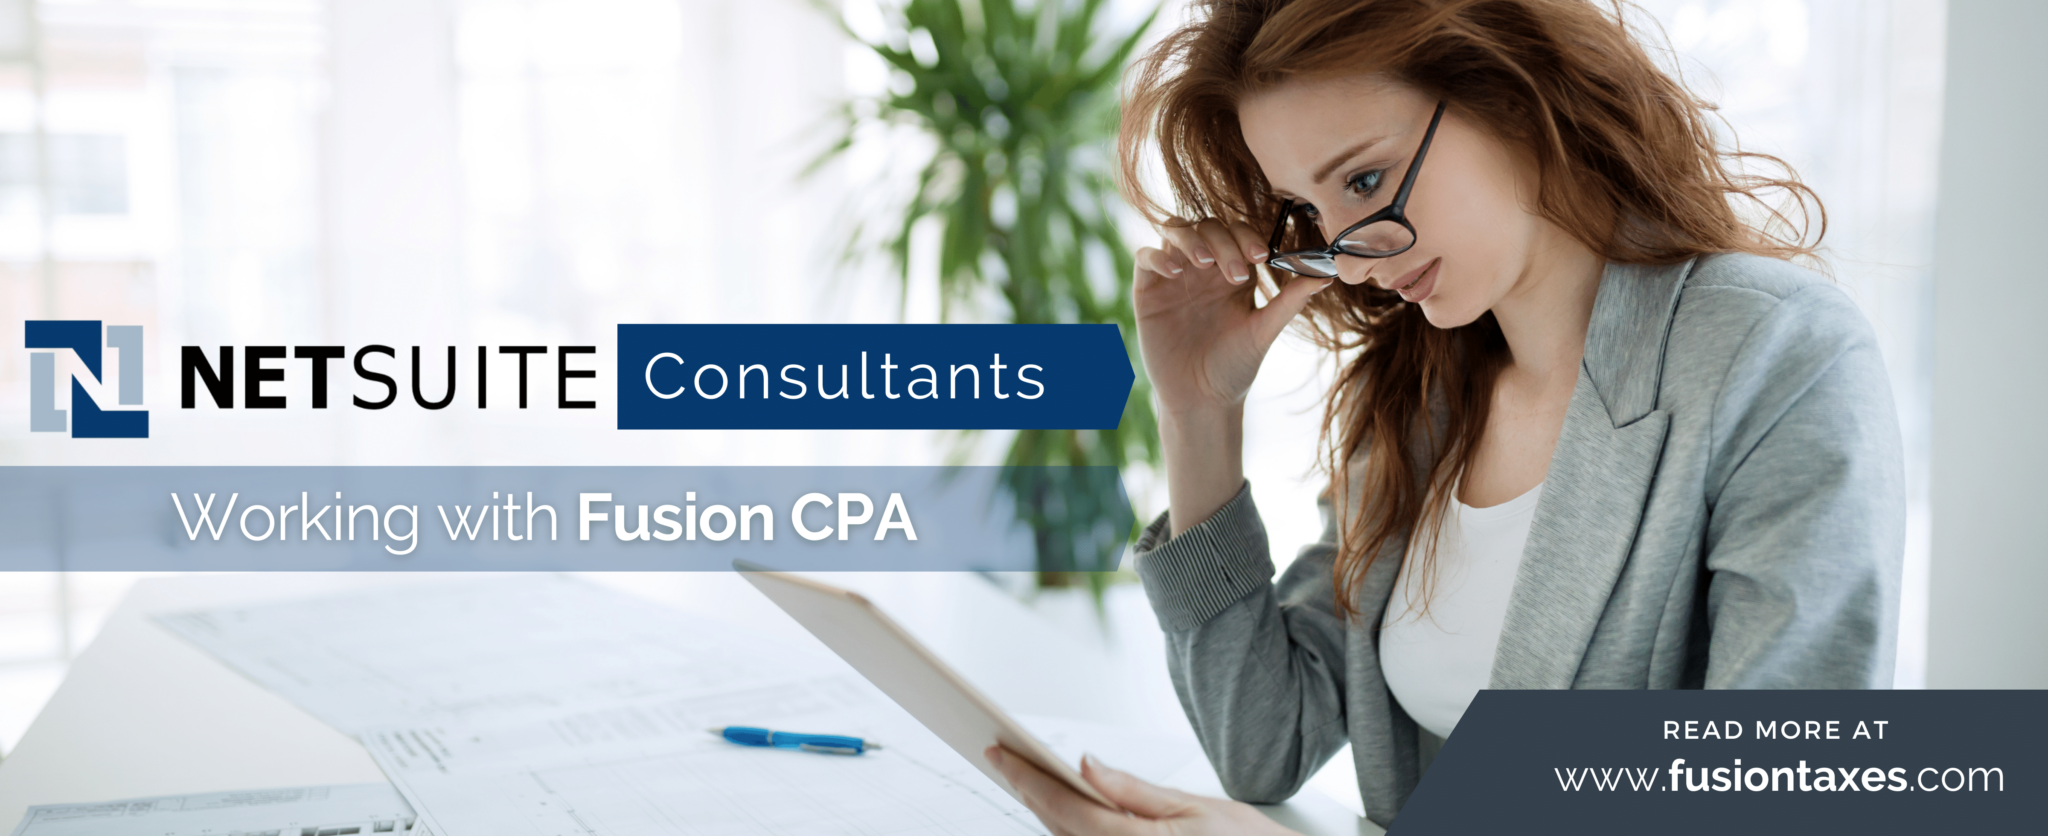 NetSuite Consultants at Fusion CPA